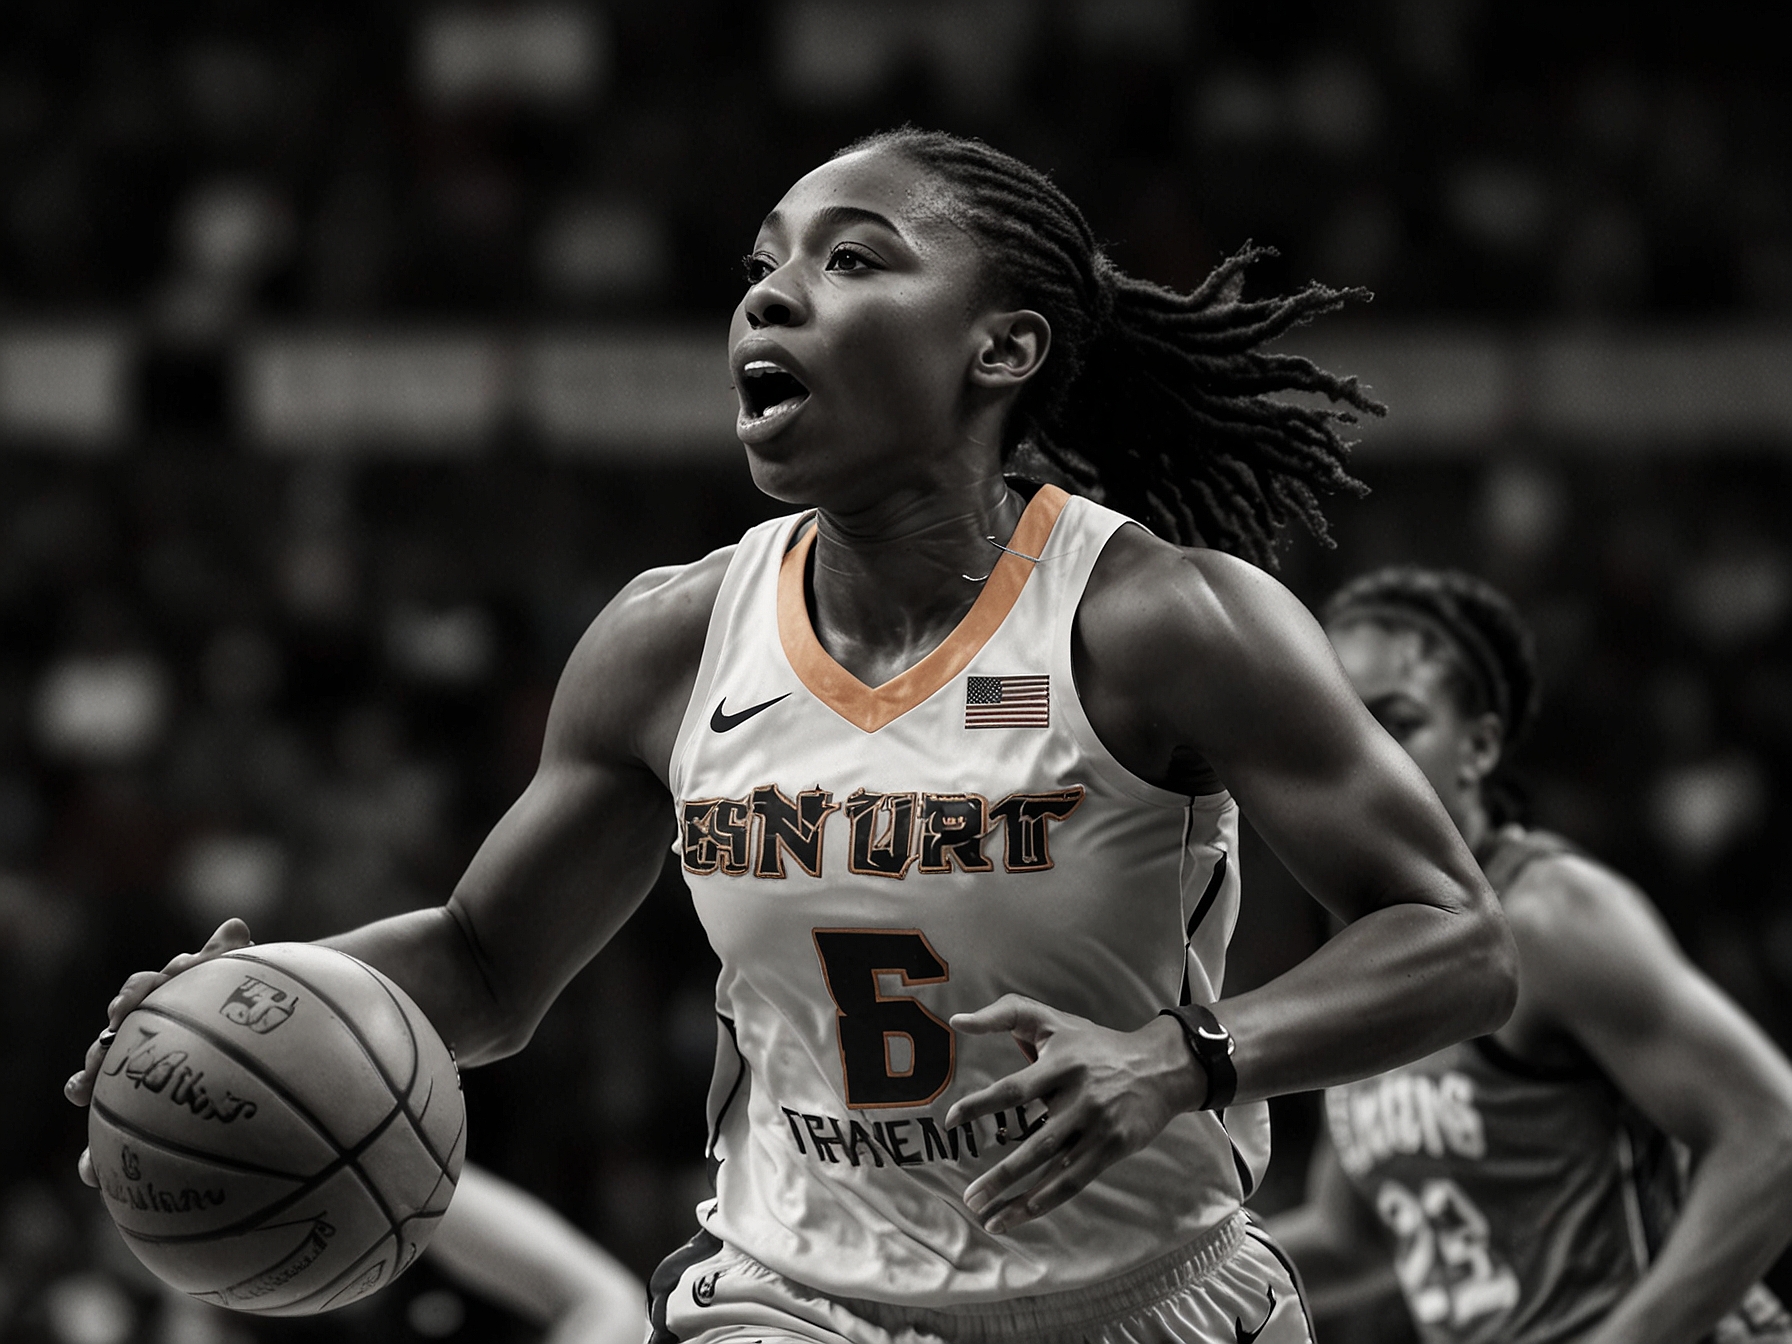 Nneka Ogwumike of the Connecticut Sun drives to the basket, showcasing her skill and intensity. The shot encapsulates the high stakes and competitive spirit expected in the upcoming game against the Seattle Storm.